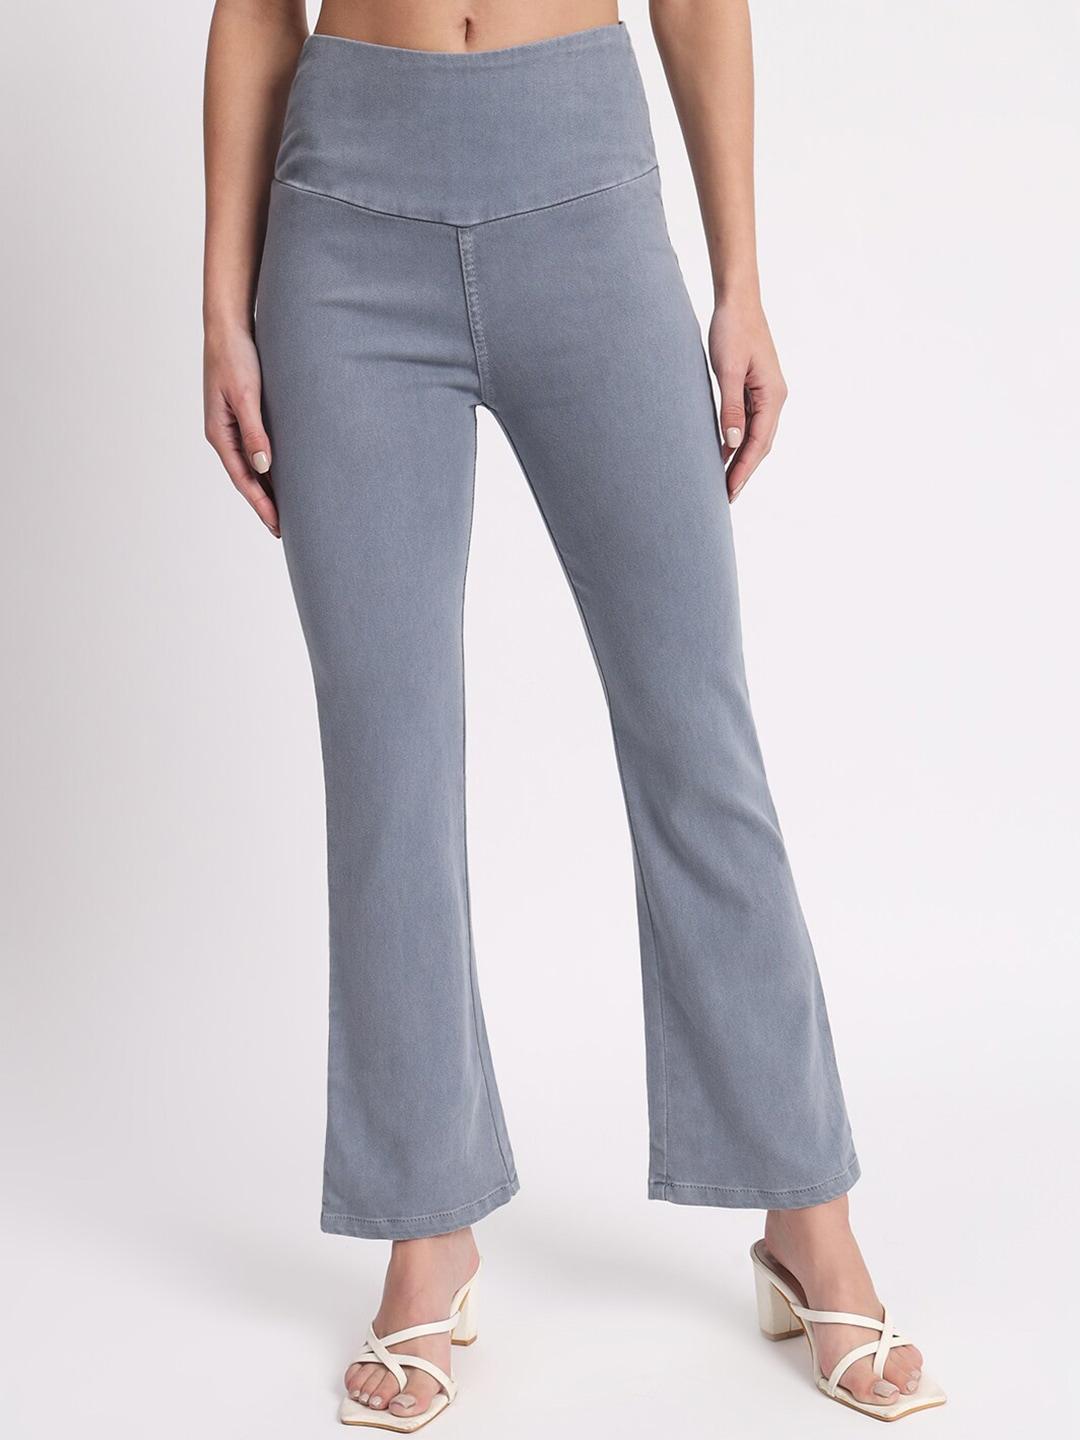 angelfab-women-relaxed-fit-cotton-denim-jeggings